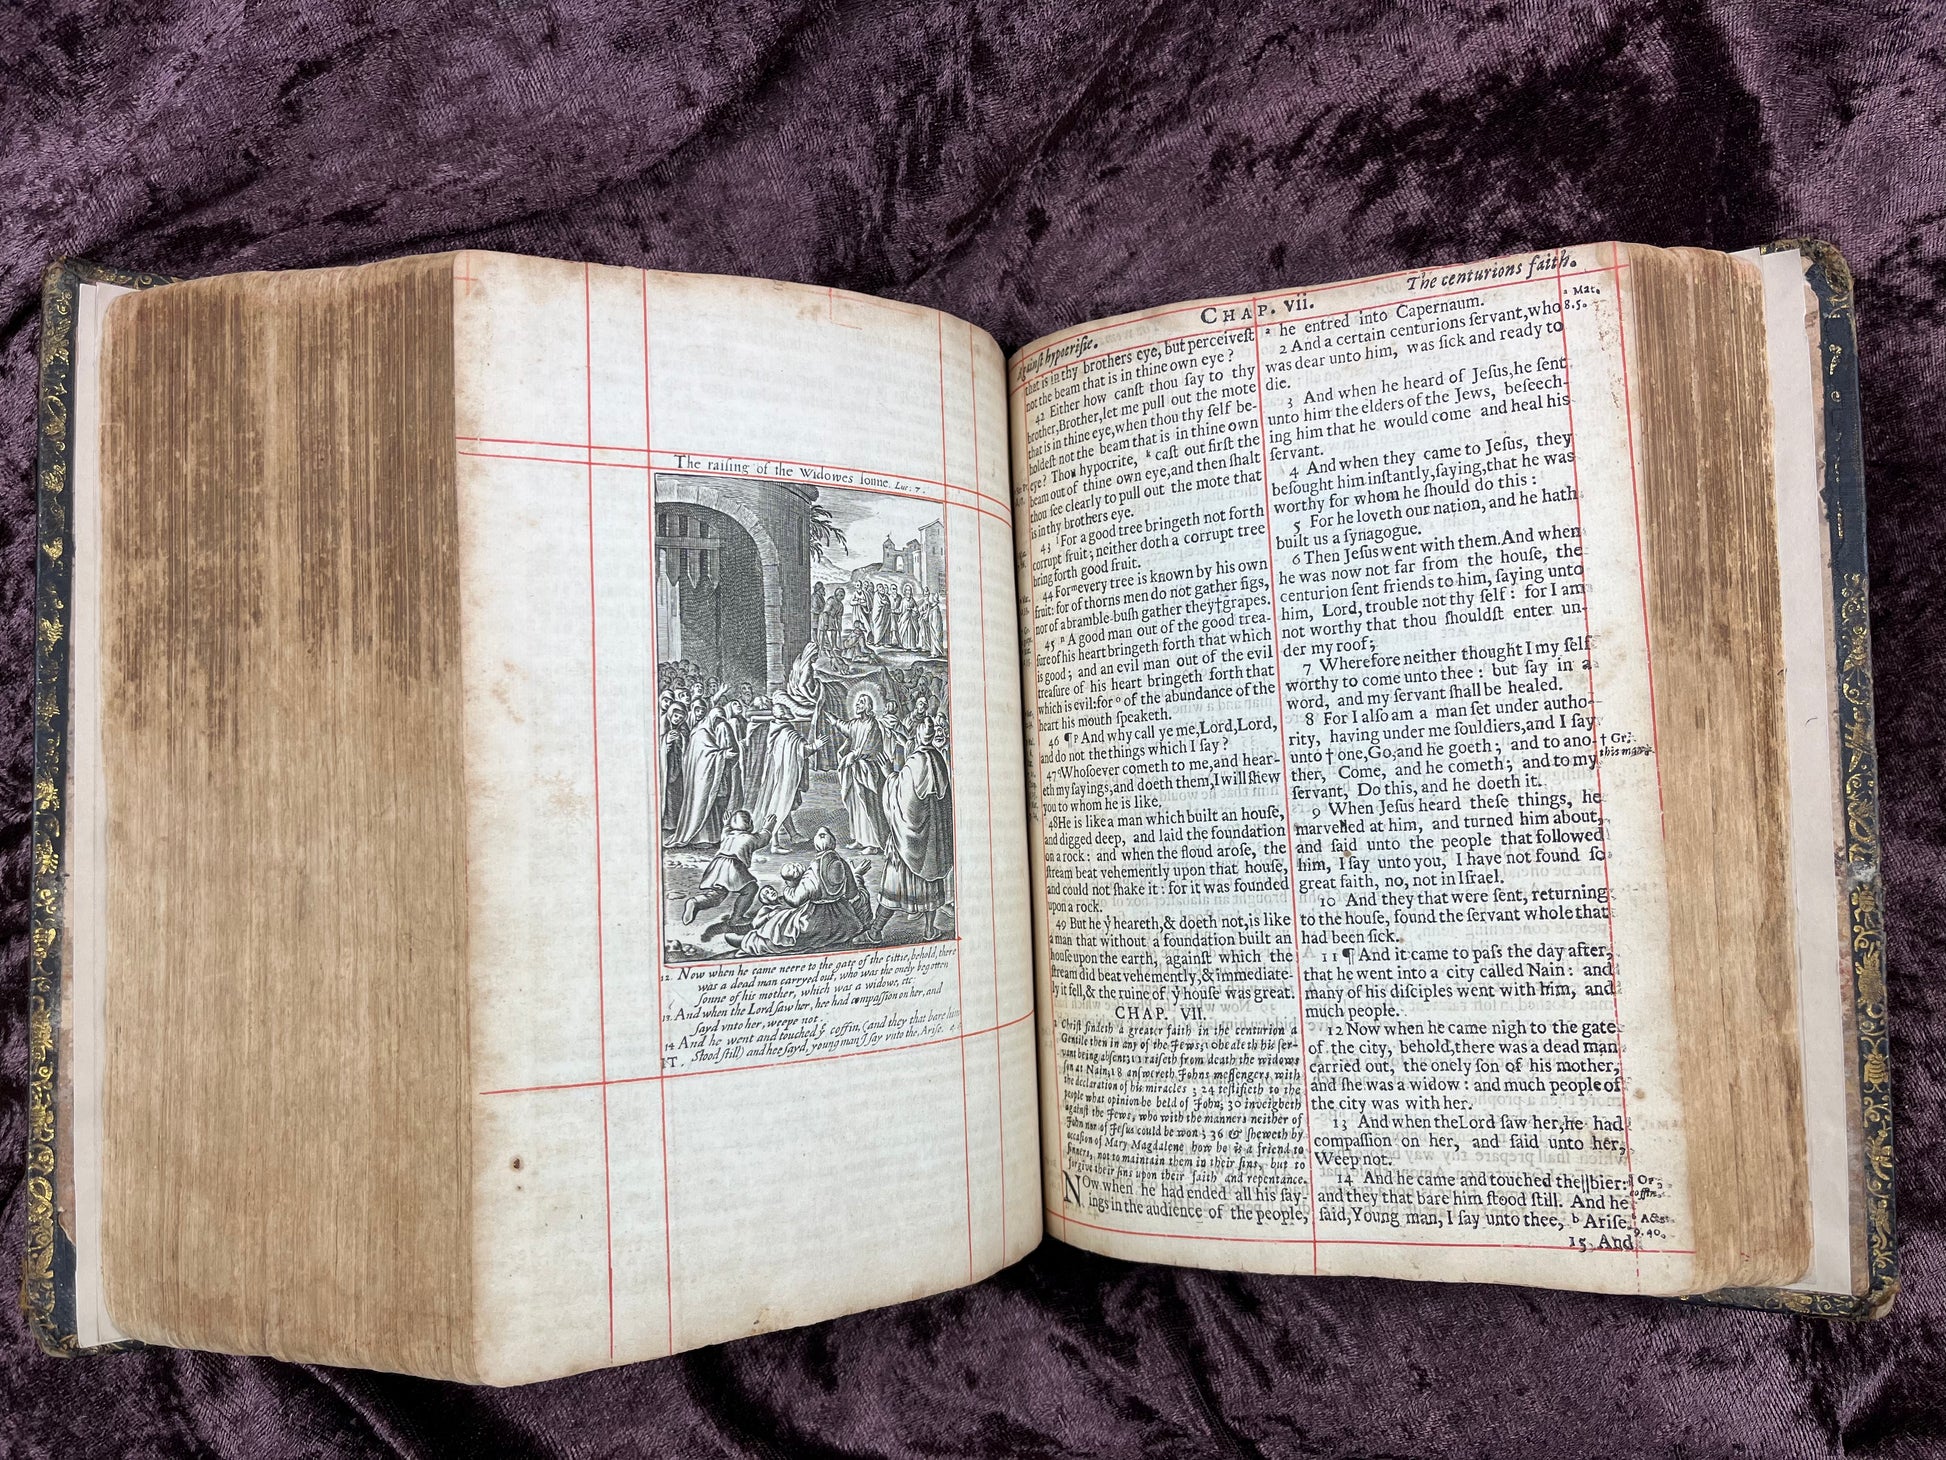 1677 Quarto John Hayes King James Bible Ruled-red With 205 Extra Illustrations E.T. Rare Books